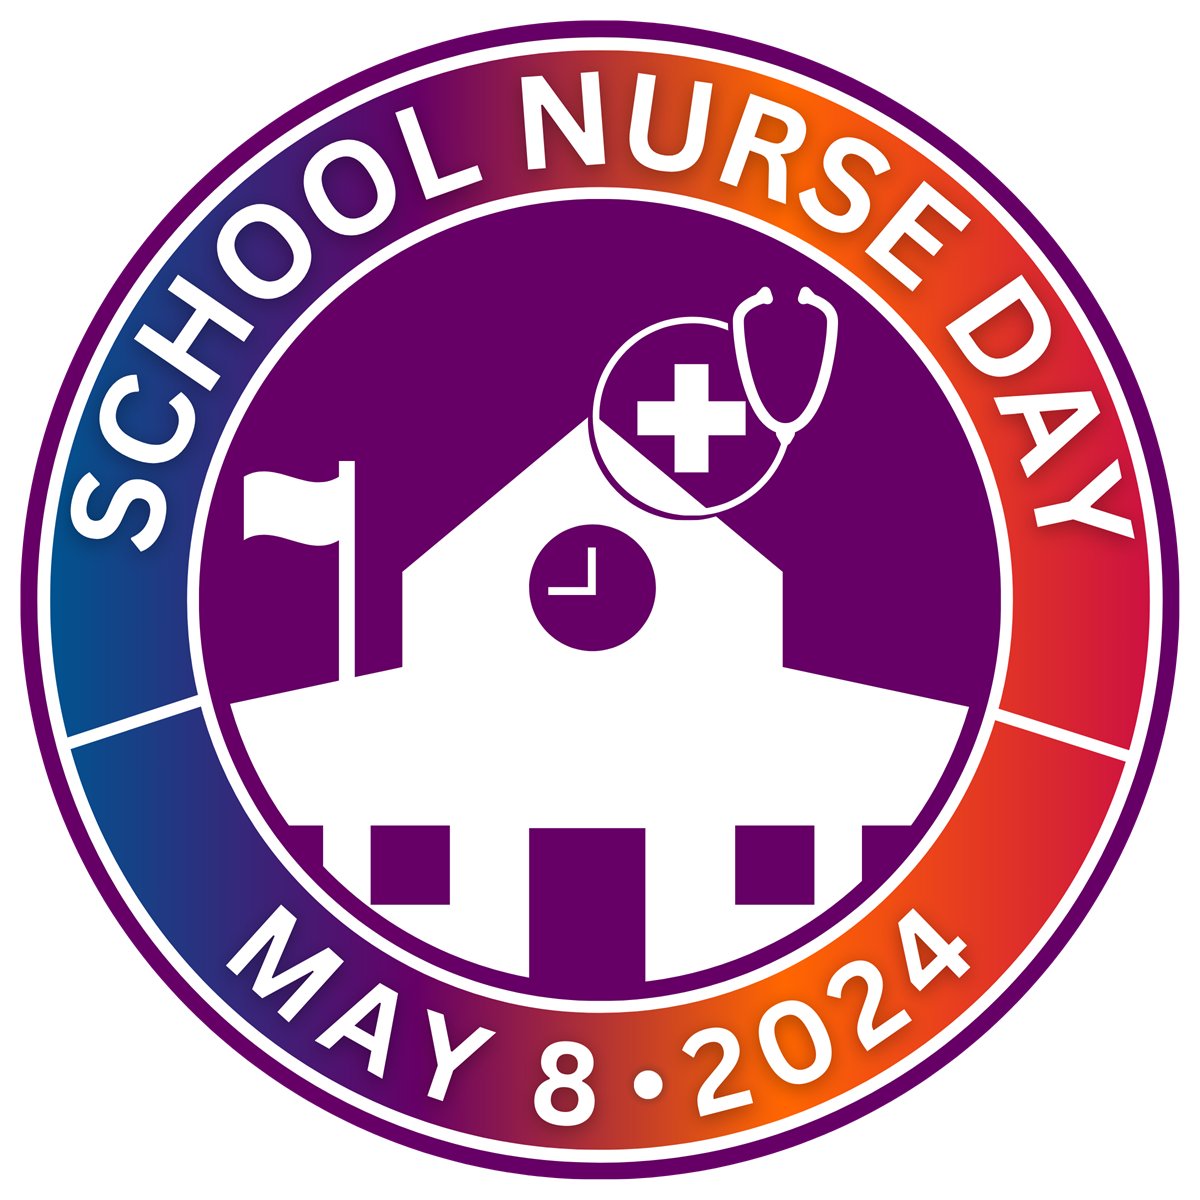 🩺 It's School Nurse Day! Today, we honor the dedicated and caring school nurses across Mustang Public Schools who play a critical role in ensuring our students' health and well-being. #MPSThanksYou 
🔗 nasn.org/advocacy/schoo….
#SND2024